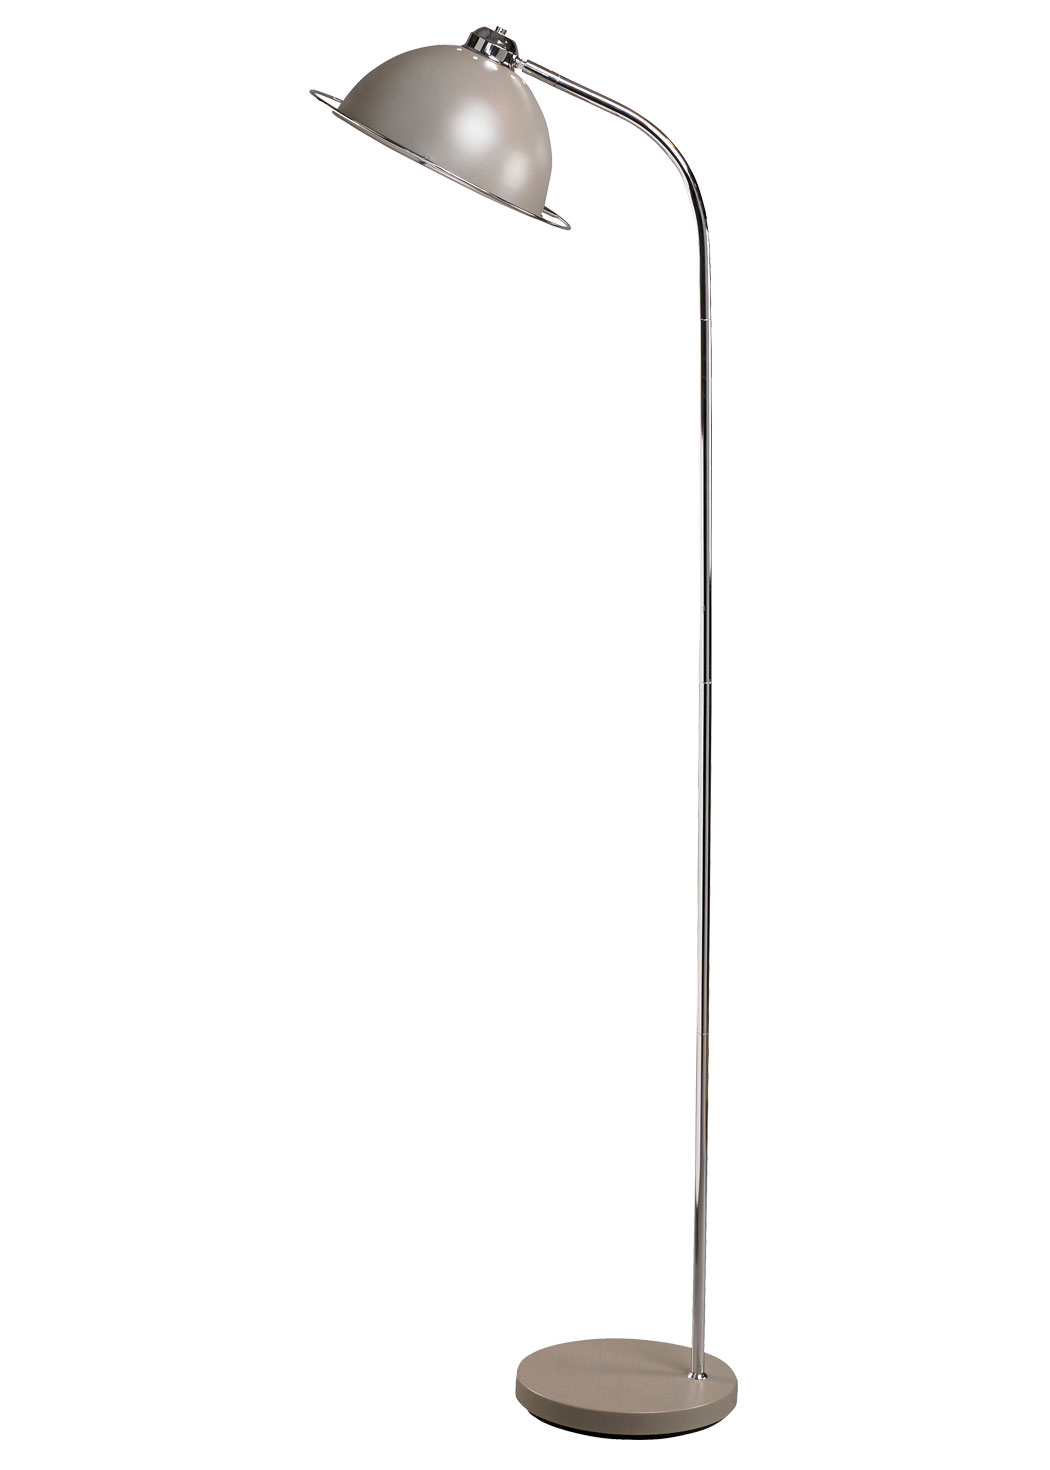 New Gooseneck Floor Lamps For Reading Modern Design Models throughout sizing 1050 X 1470